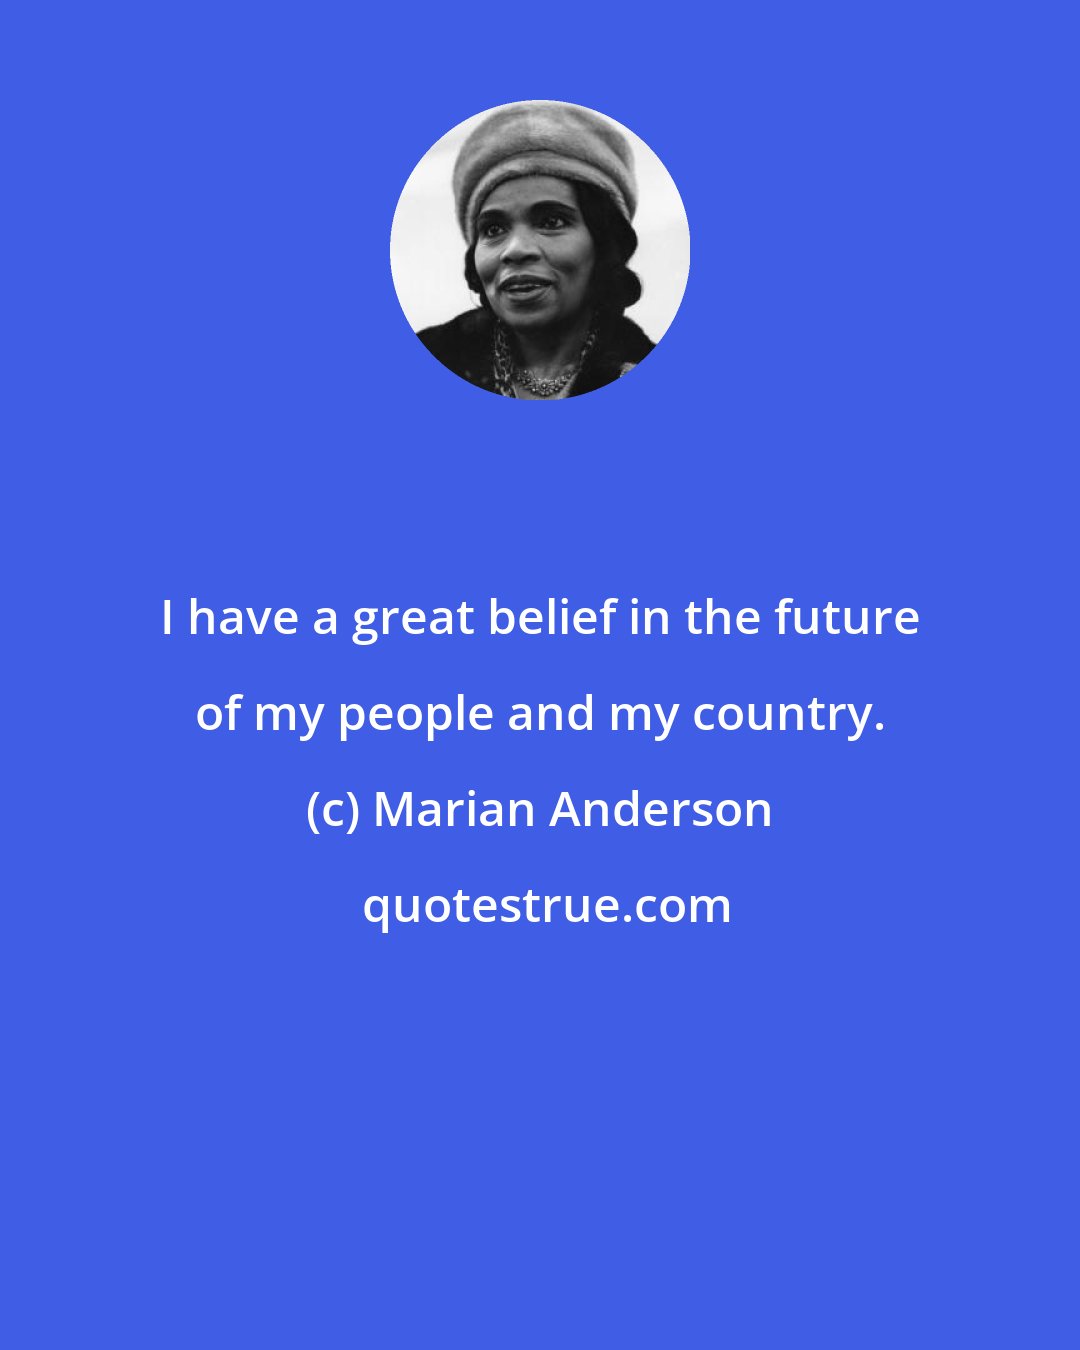 Marian Anderson: I have a great belief in the future of my people and my country.